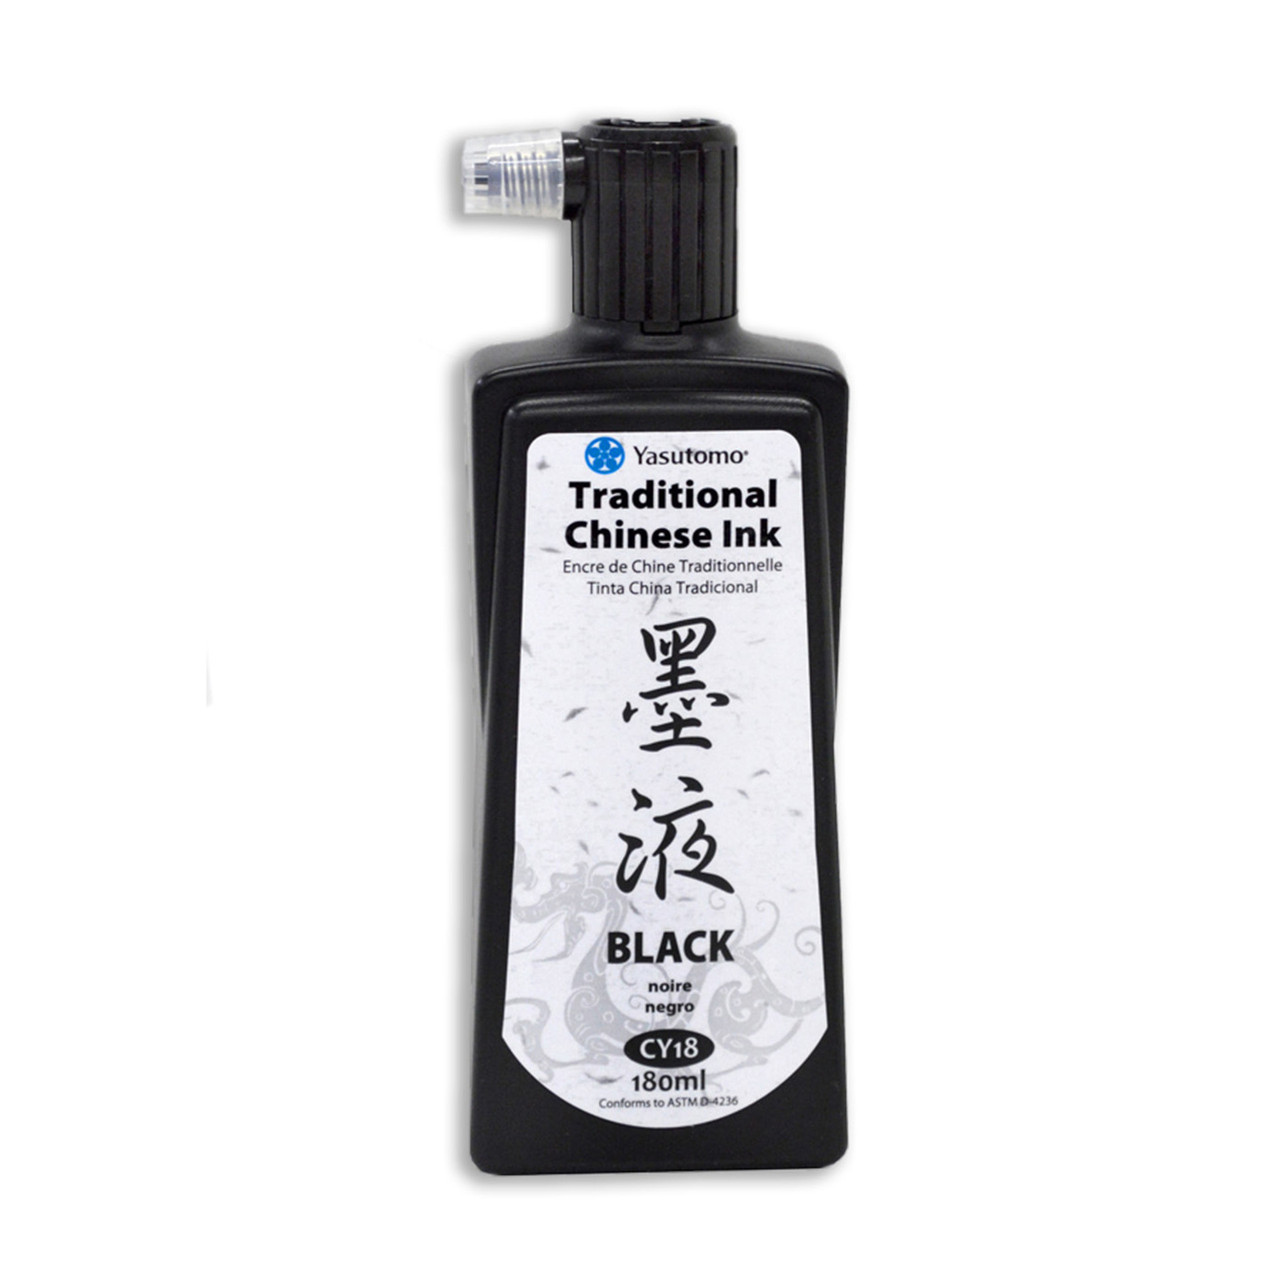 Easyou Hukaiwen Liquid Sumi Ink Chinese Black Calligraphy Ink for Chinese Japanese Traditional Calligraphy and Painting 3pcs/pack